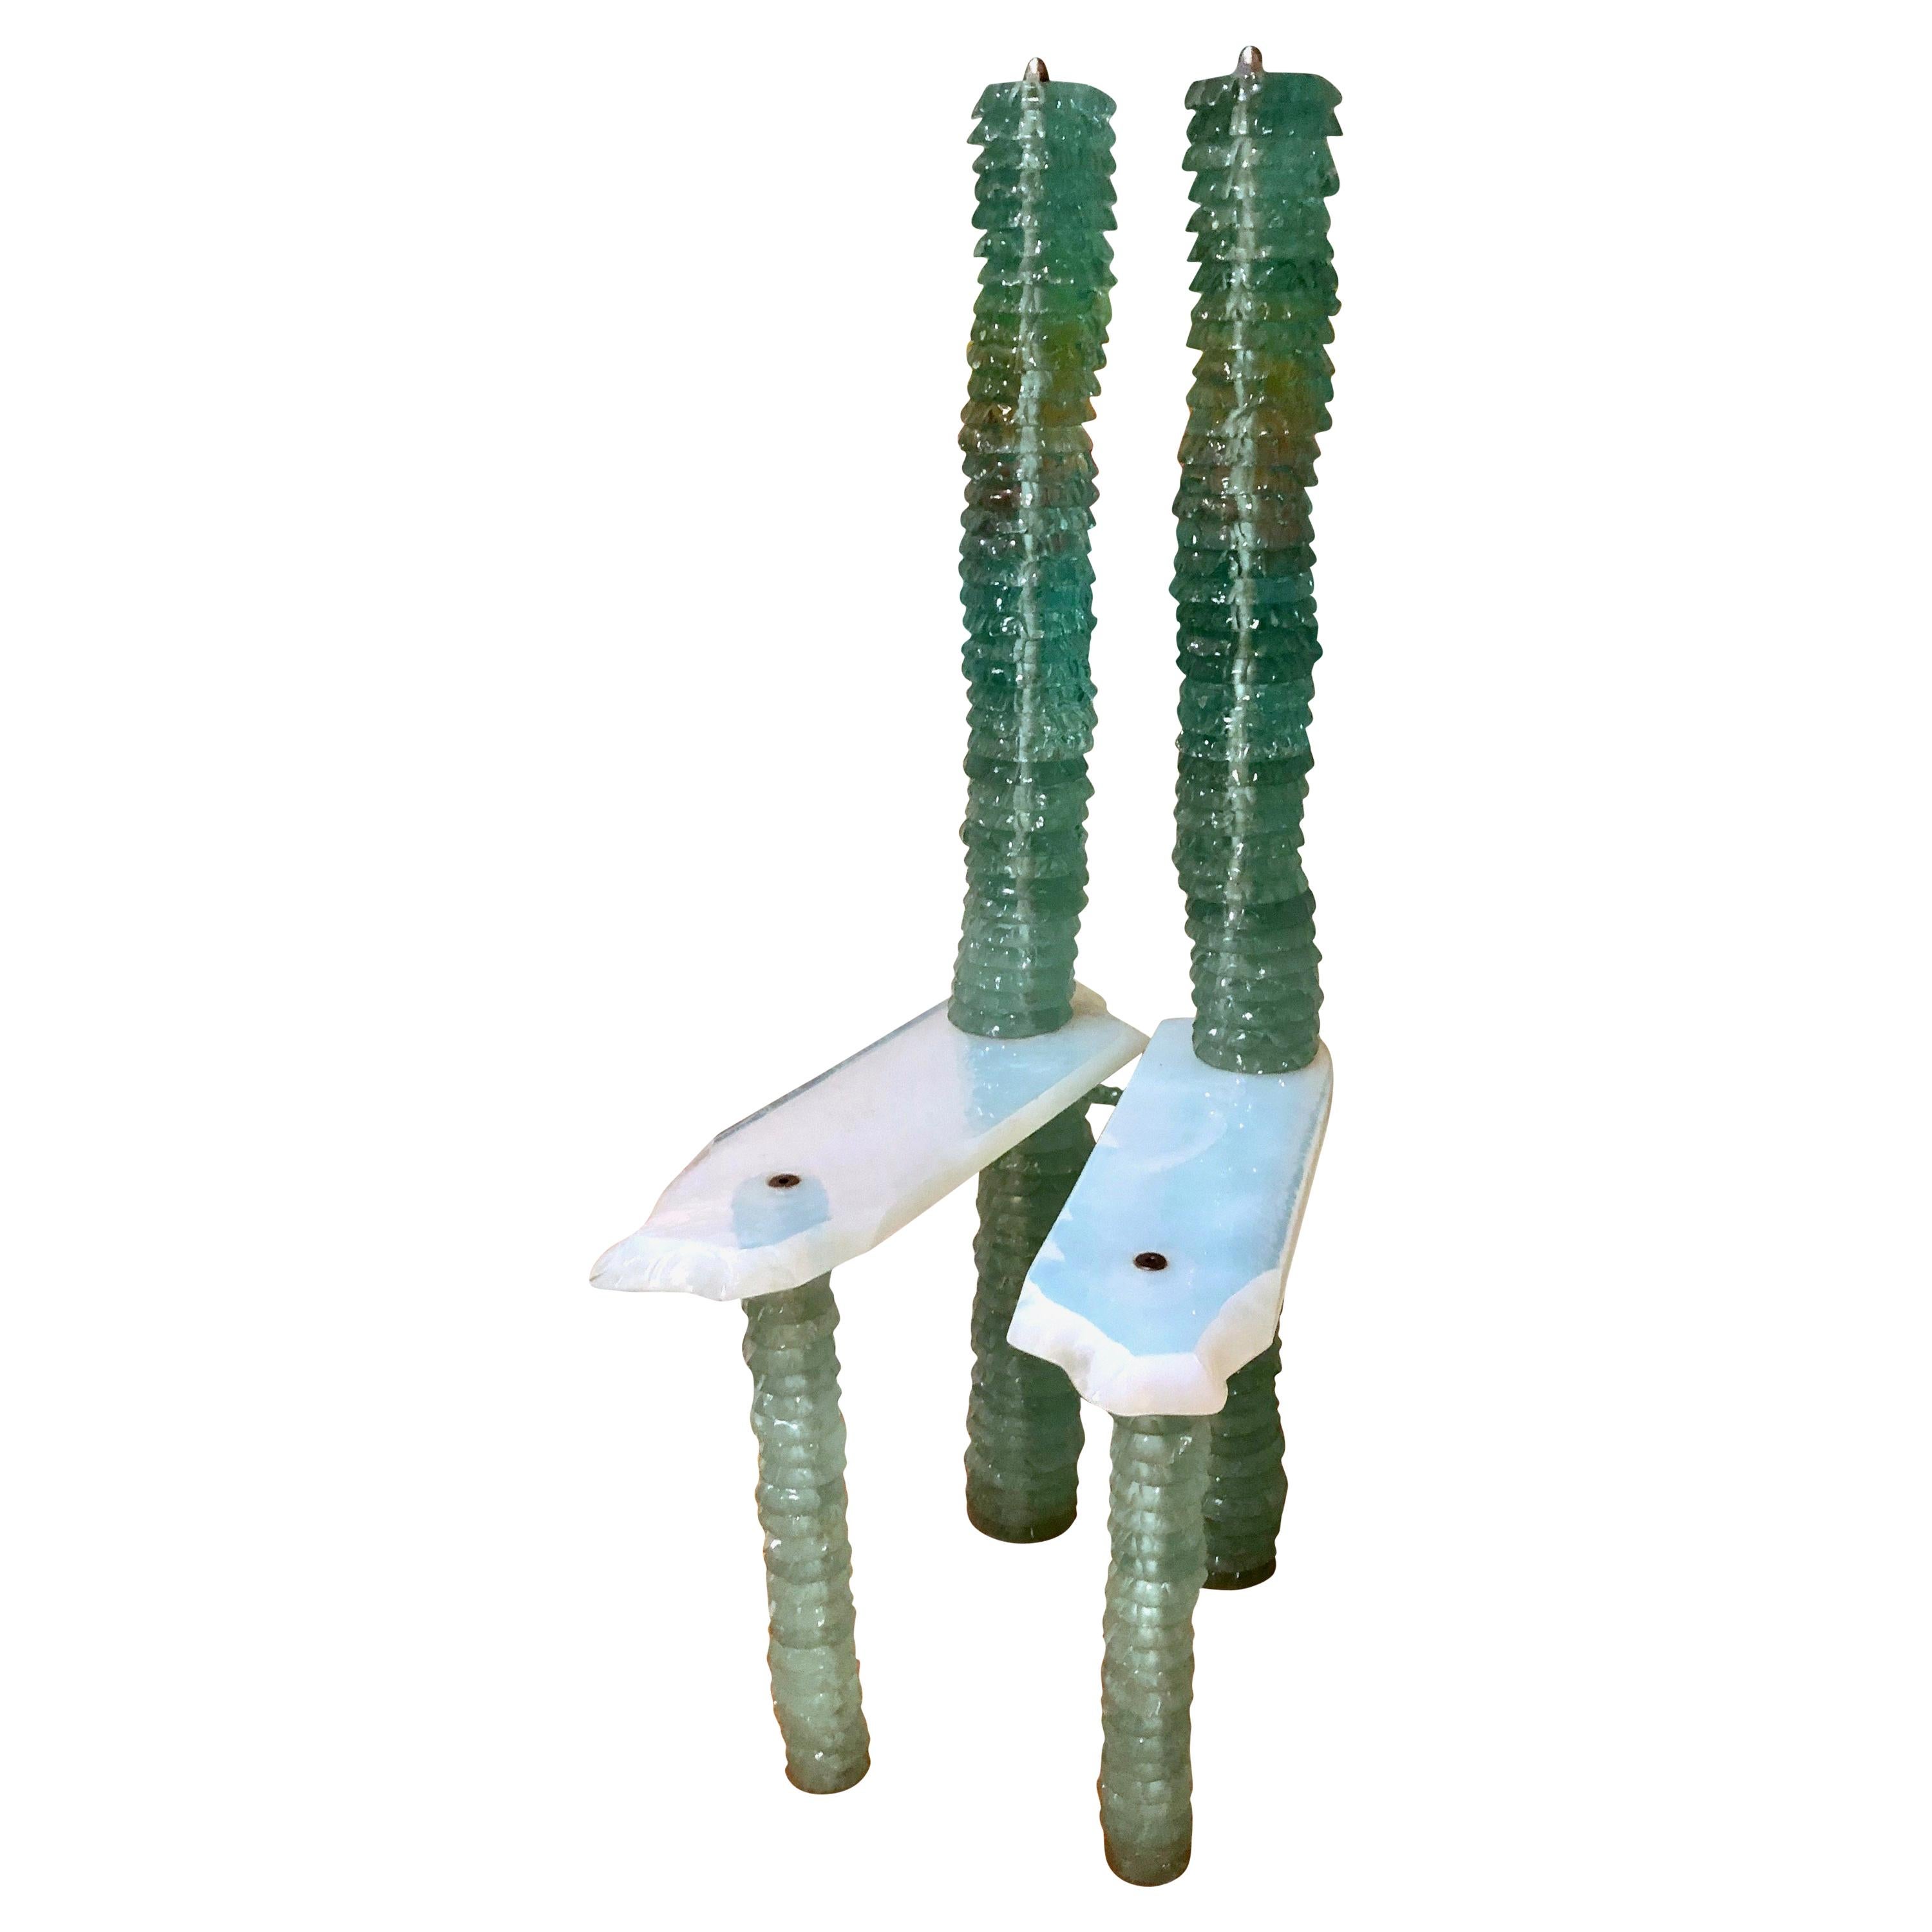 "Solomon" Chair Sculpture by Danny Lane in Stacked Glass, 1988